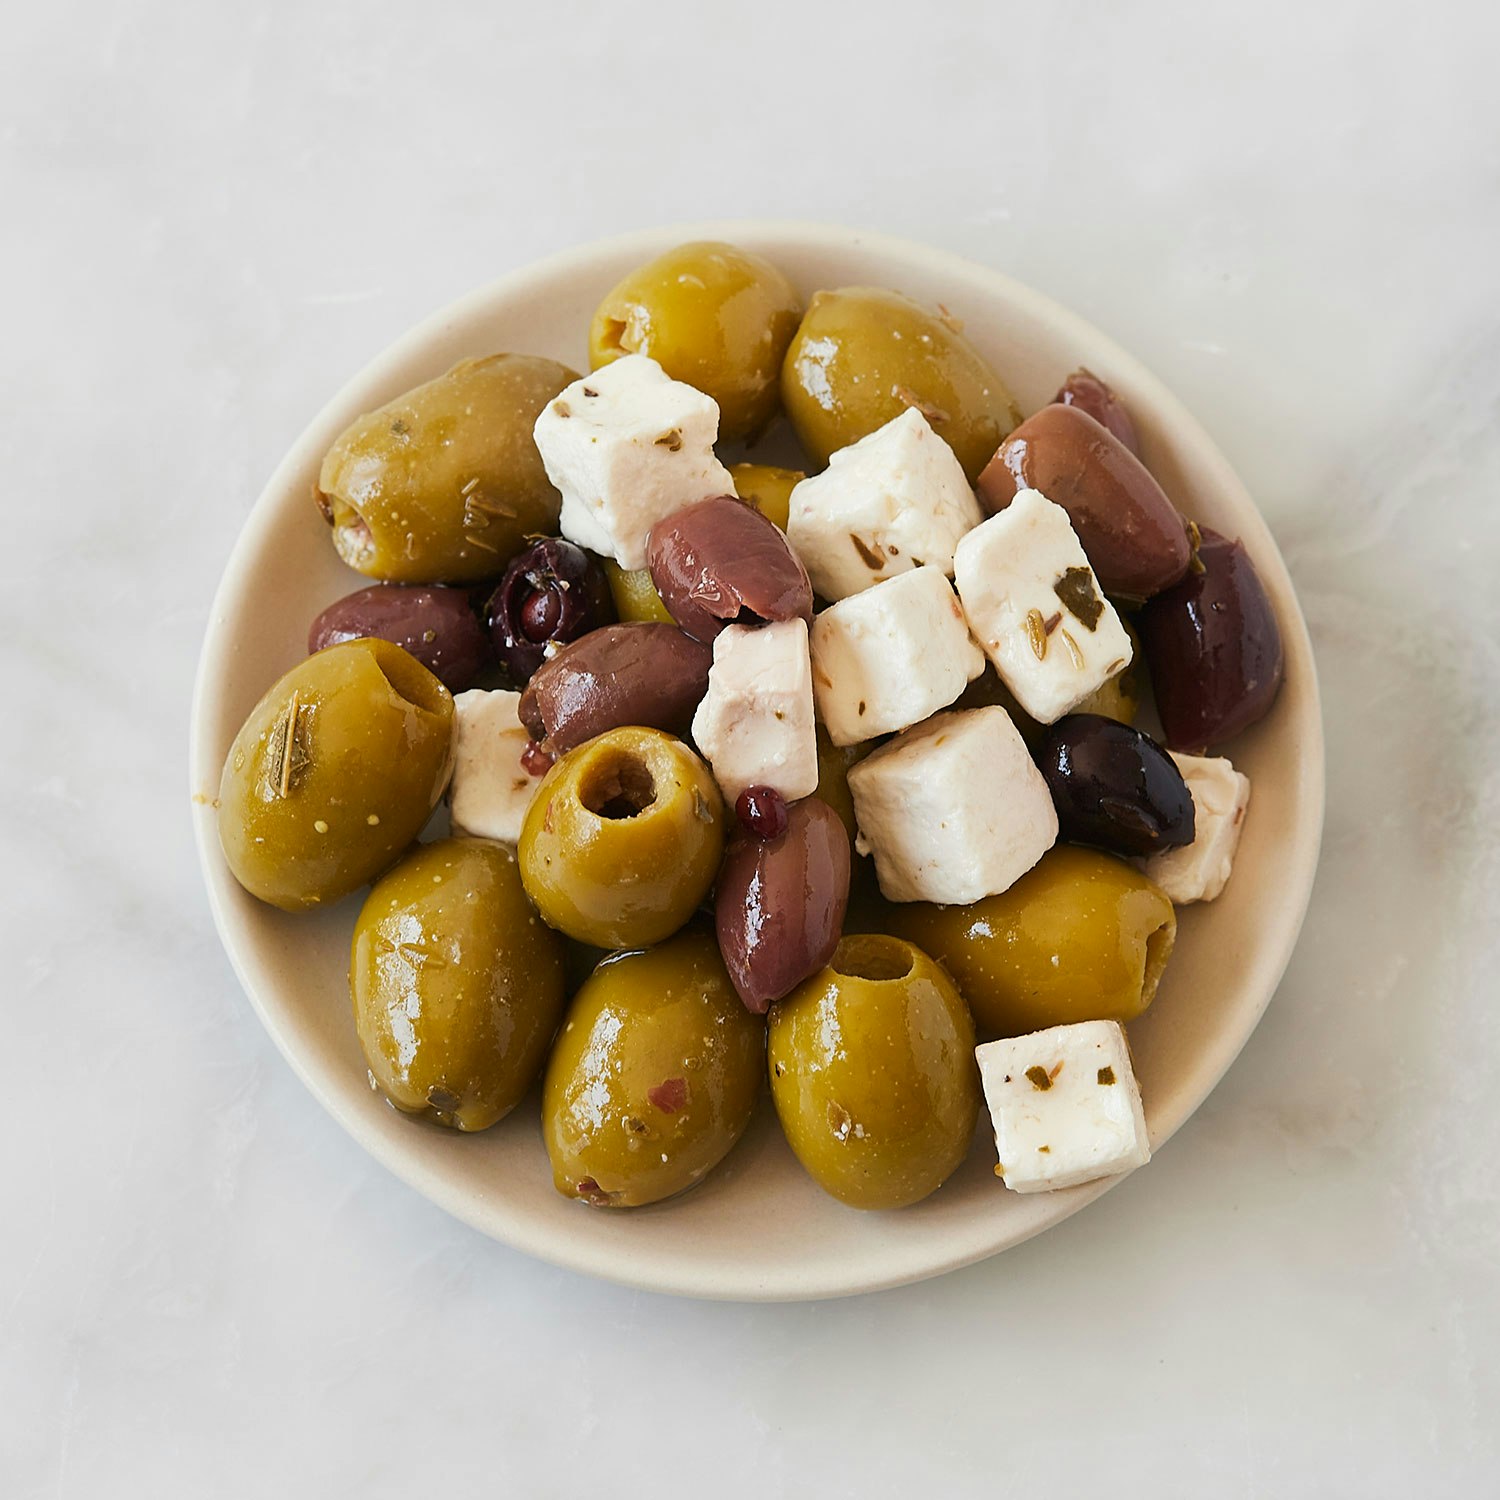 Murrays-Marinated-Feta-And-Greek-Olives-specialty-foods-127343-02